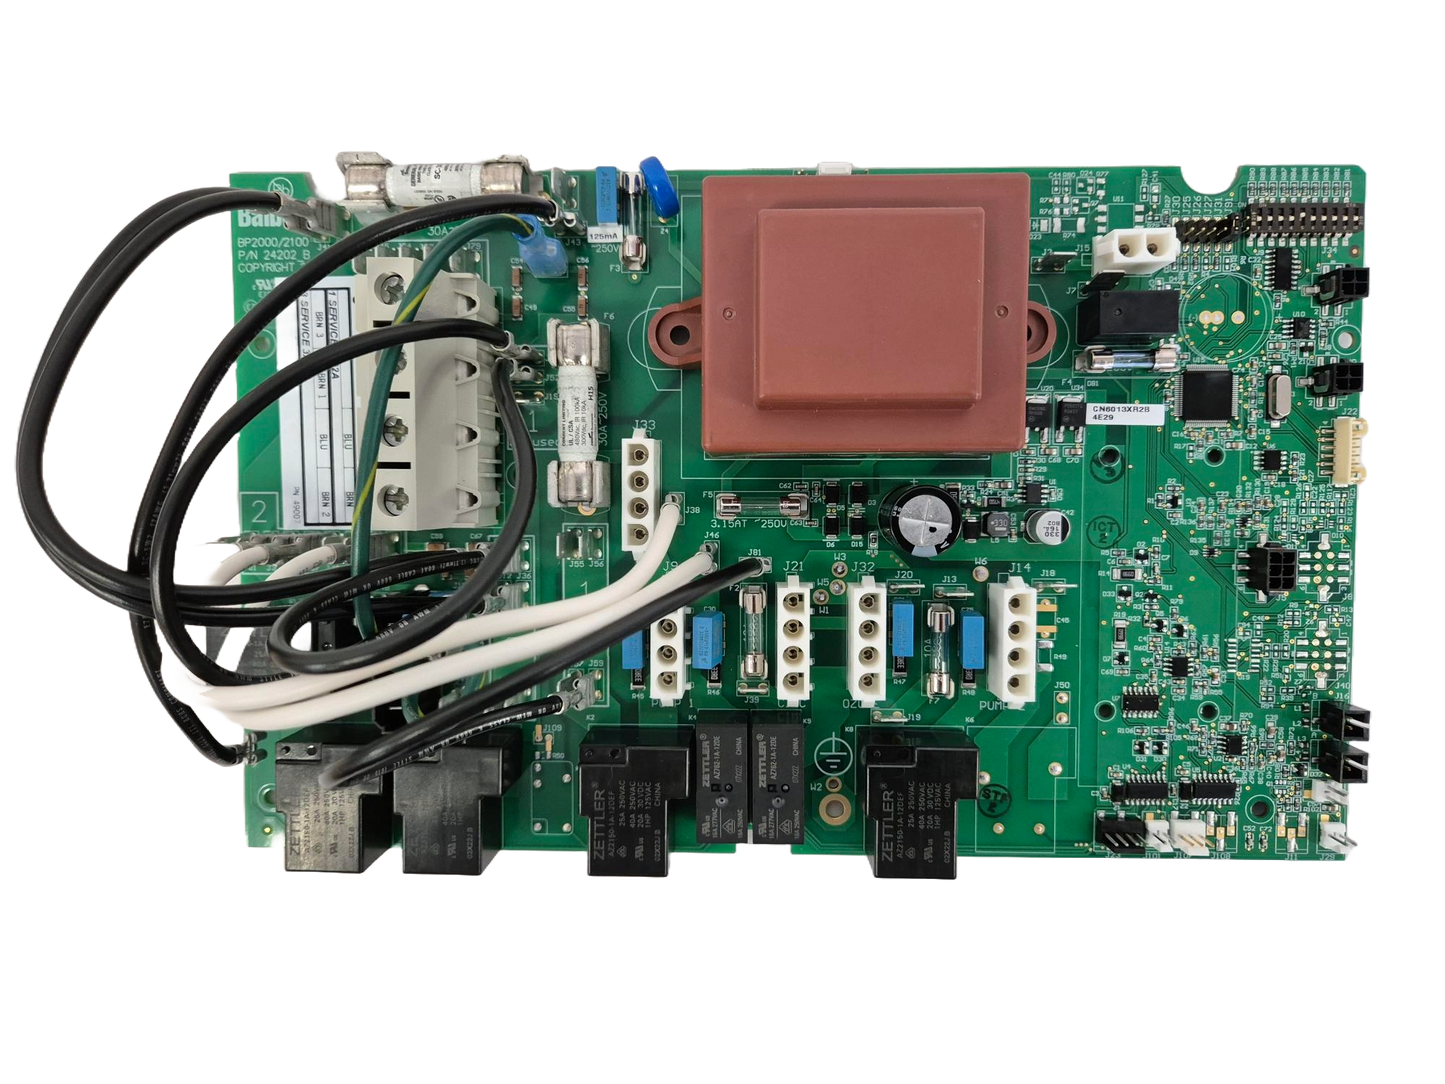 Circuit Board for CN6013X 3KW - With Climatezone (Part Number: 56867) Compatible Replacement for All BP600 Boards